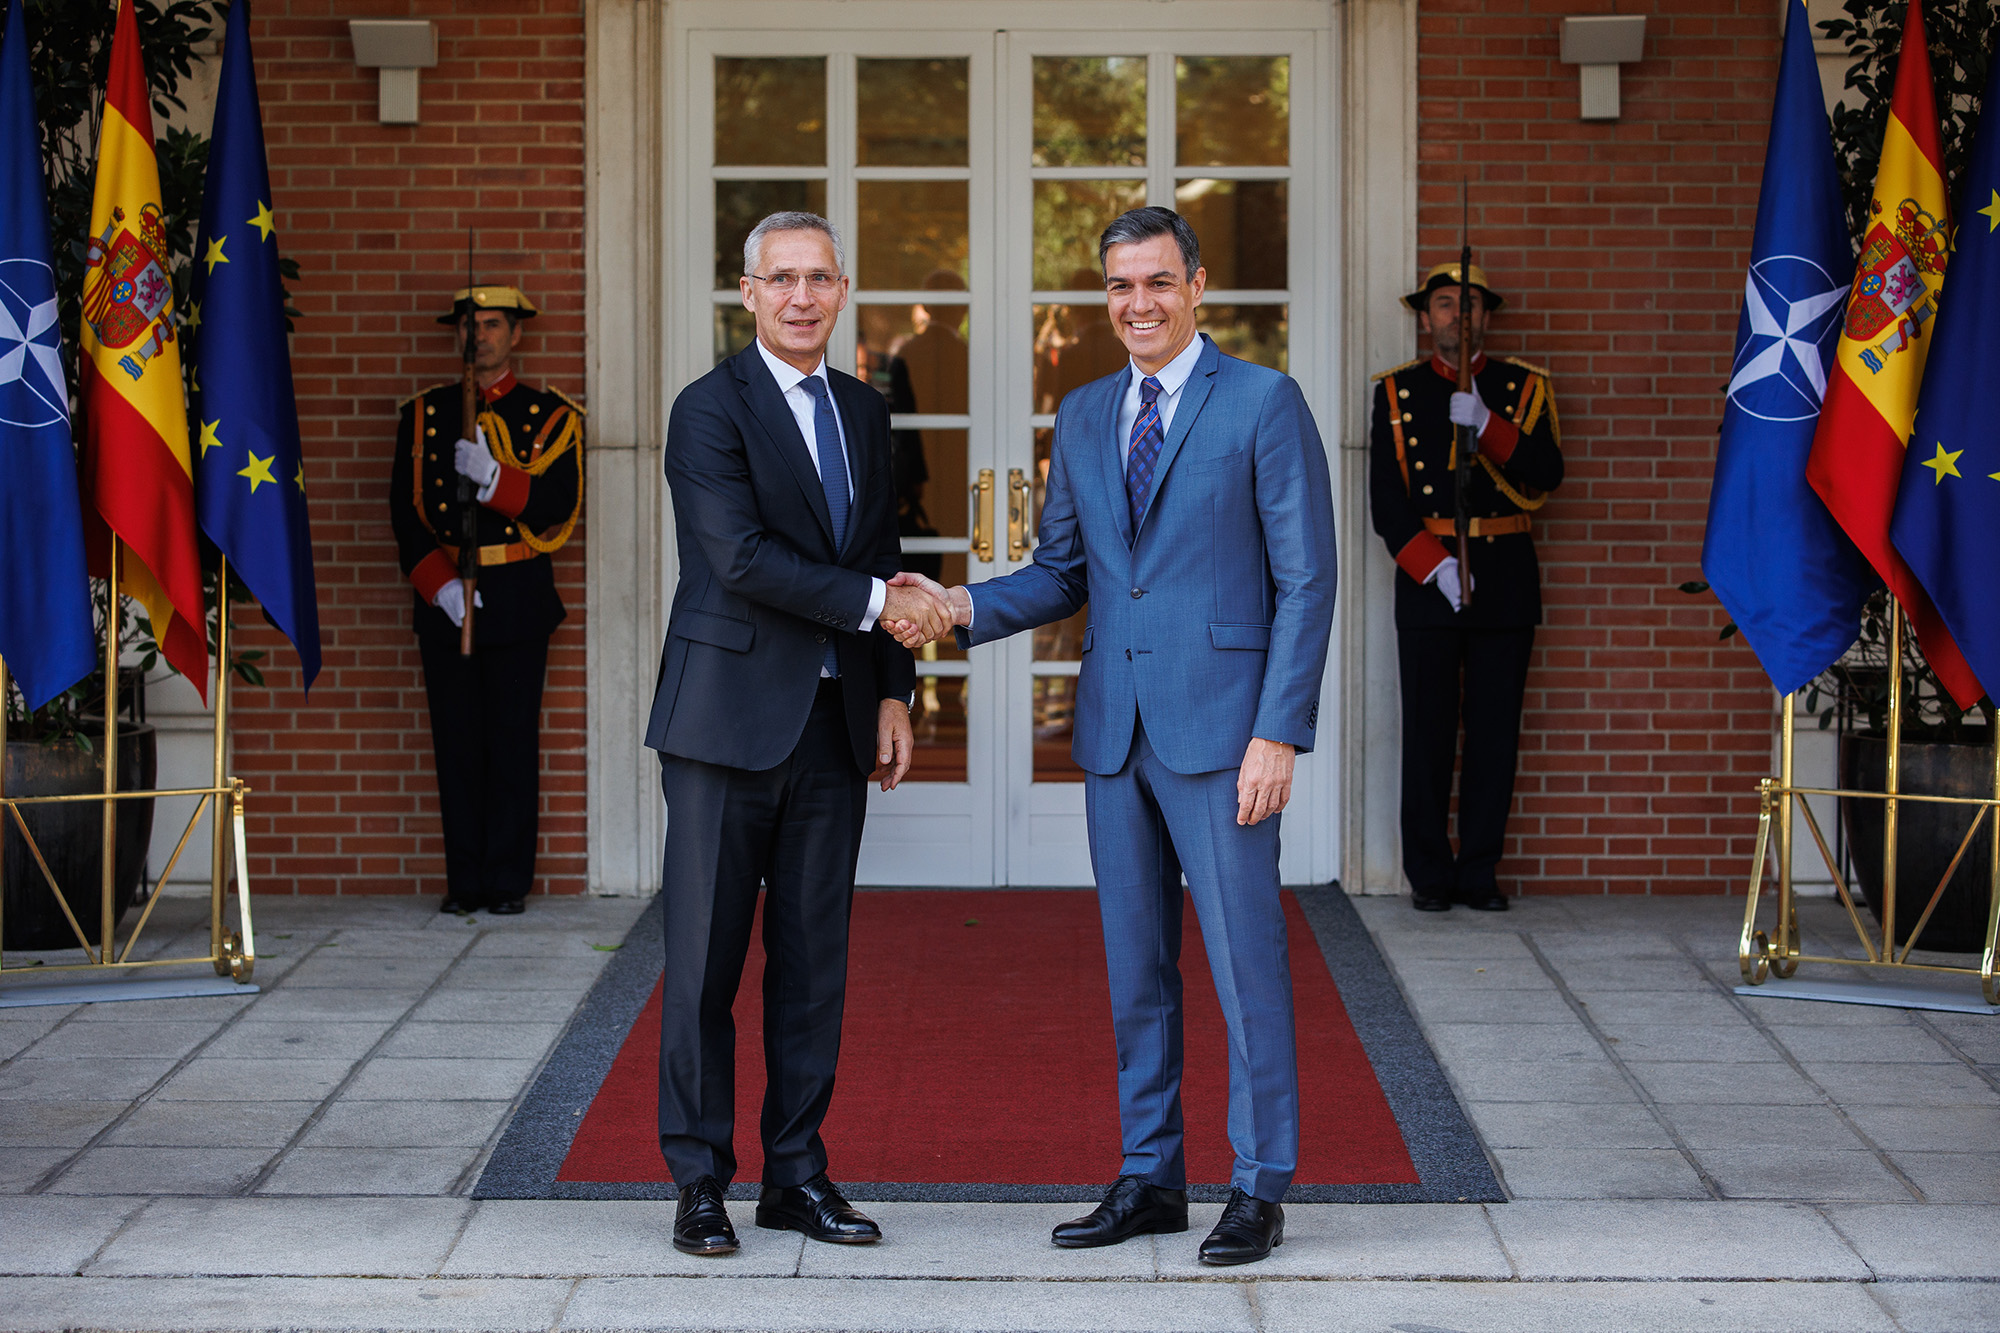 Spanish President Pedro Sanchez (right), receives NATO Secretary General Jens Stoltenberg at the Moncloa Palace in Madrid, Spain, on May 30.